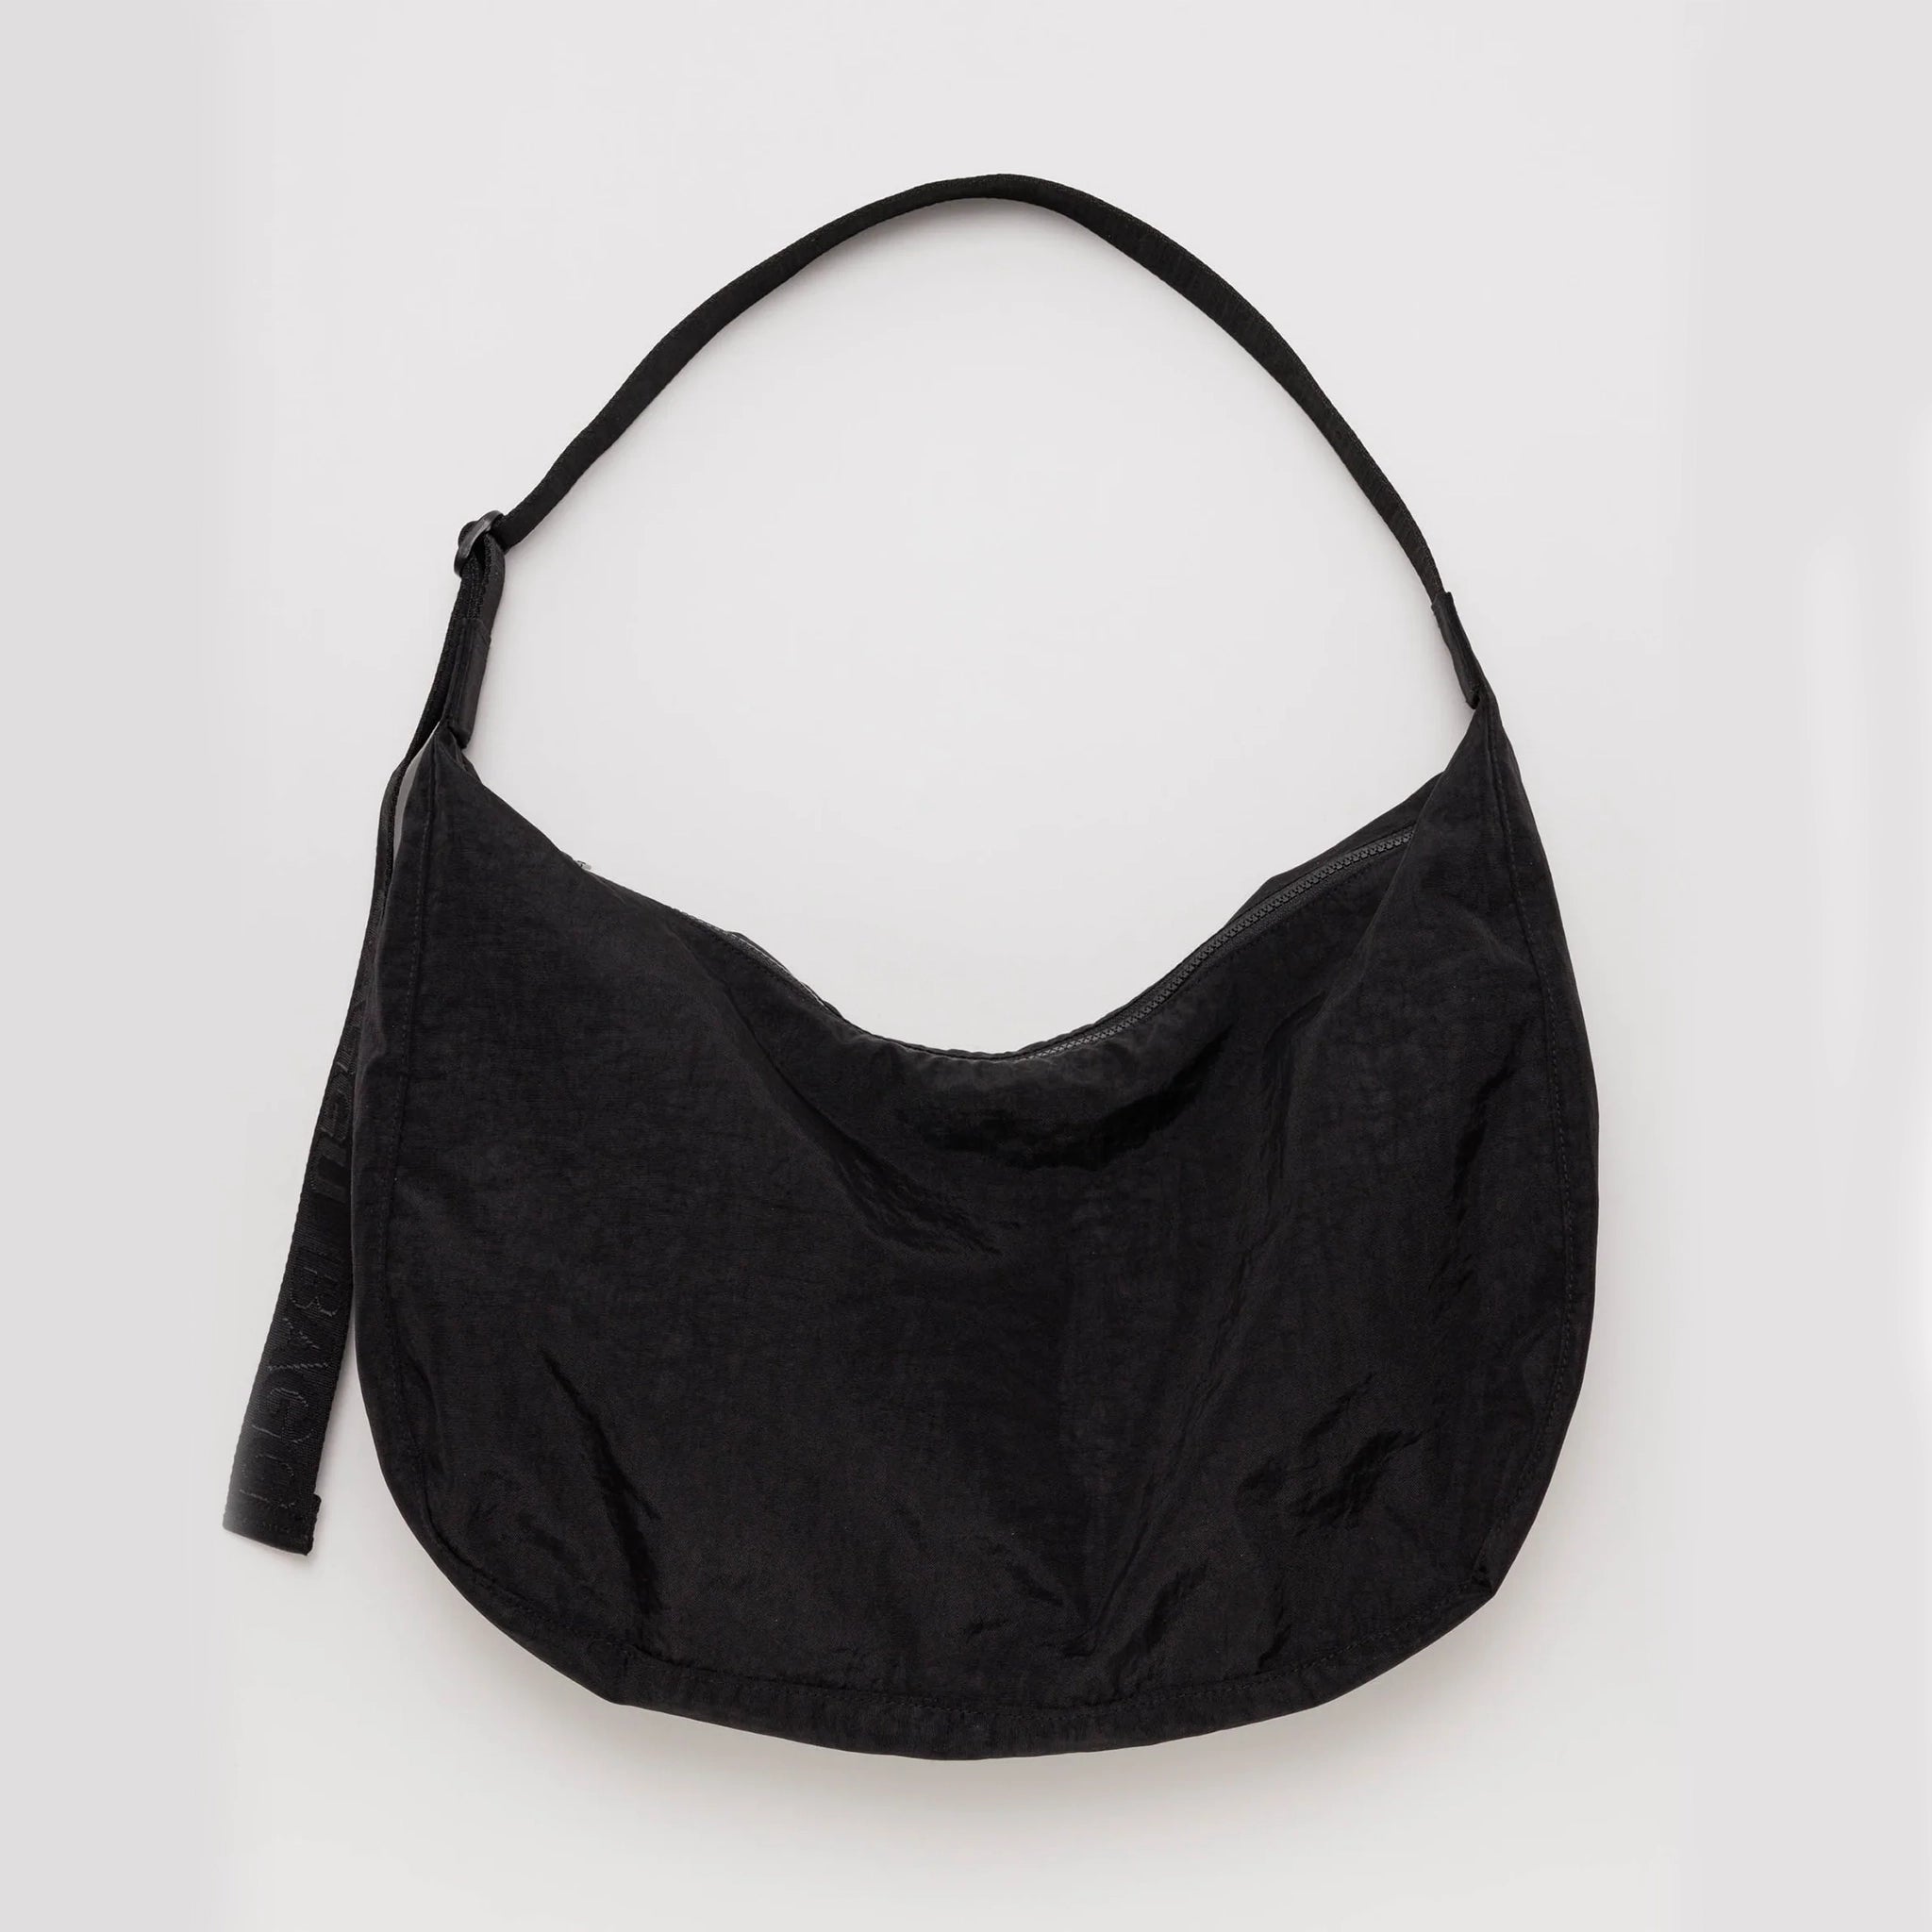 On a white background is a black nylon bag with a black adjustable strap. 